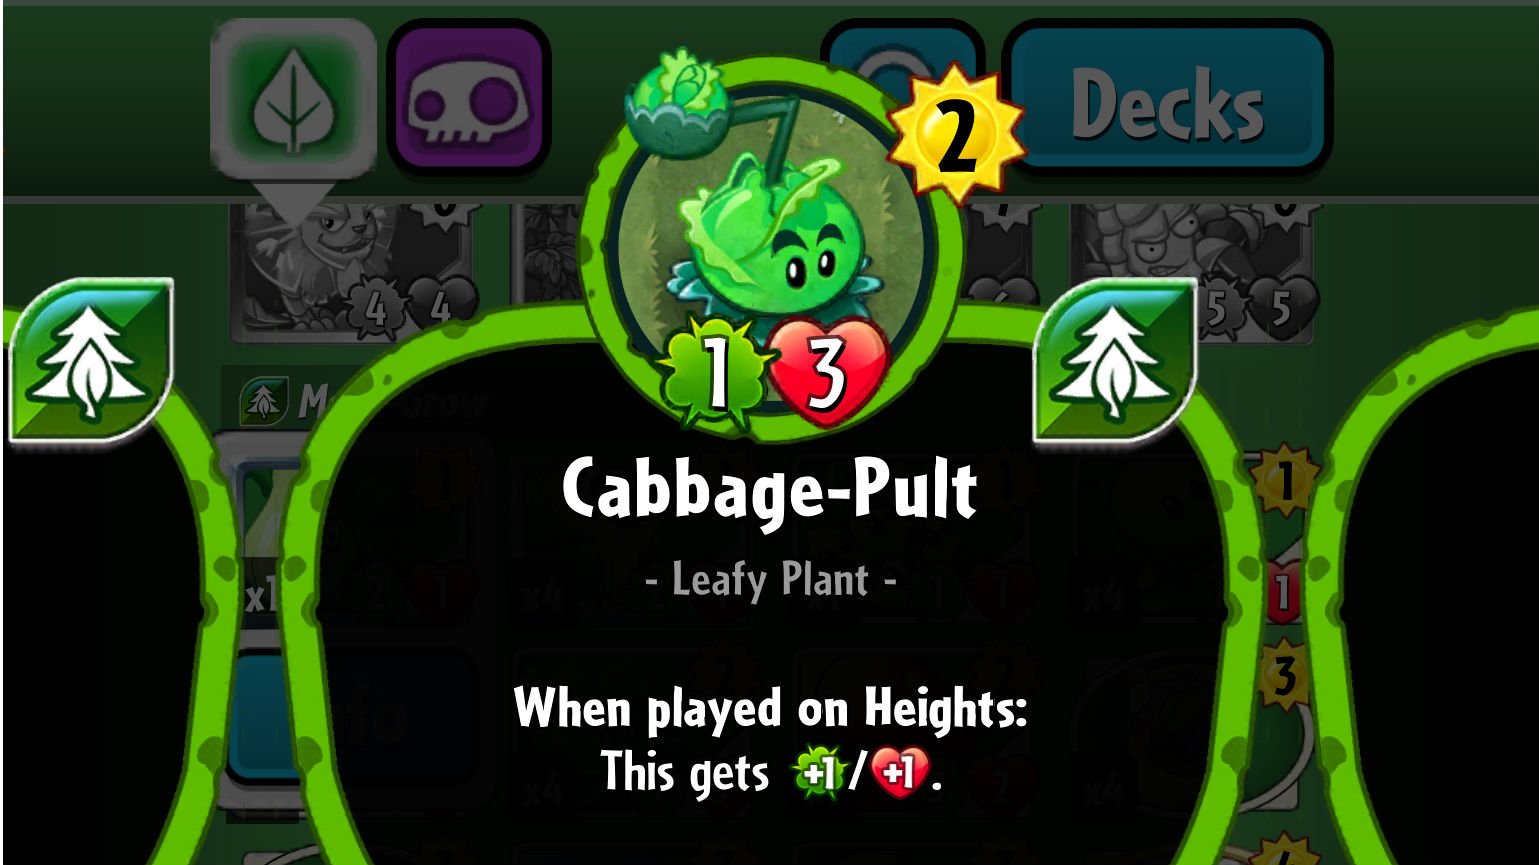 Plants vs. Zombies Heroes Cabbage-Pult